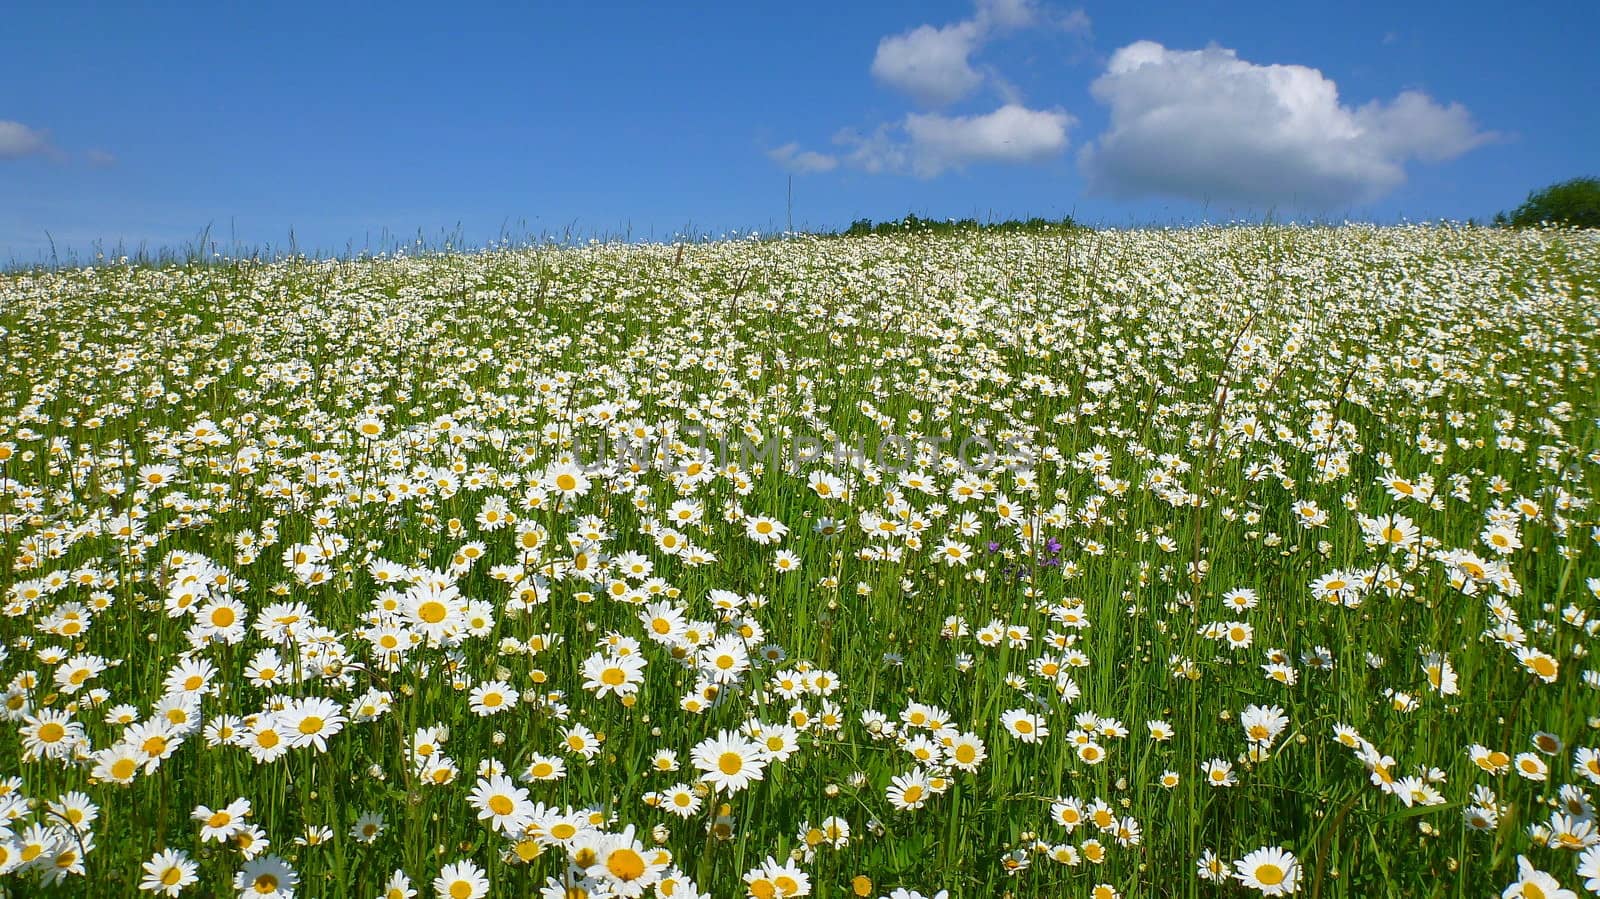 A Meadow Full Of Daisies under Blue Sky